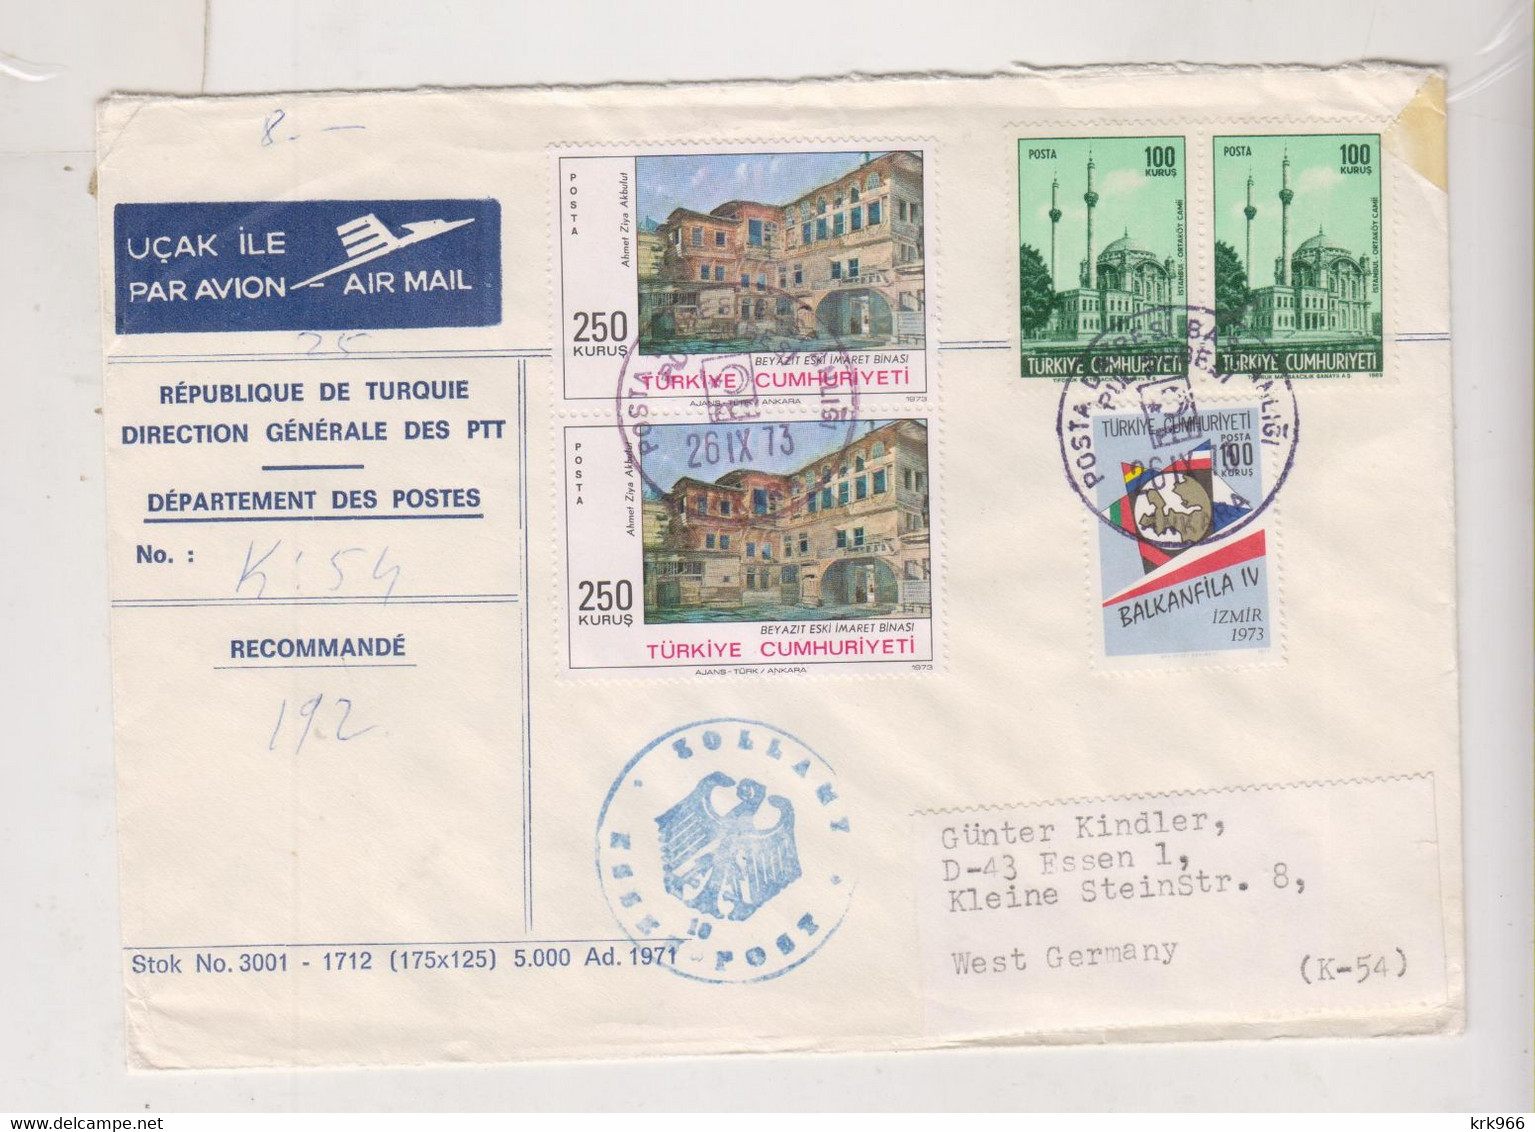 TURKEY 1973 ANKARA Registered Airmail Cover To GER;MANY - Covers & Documents